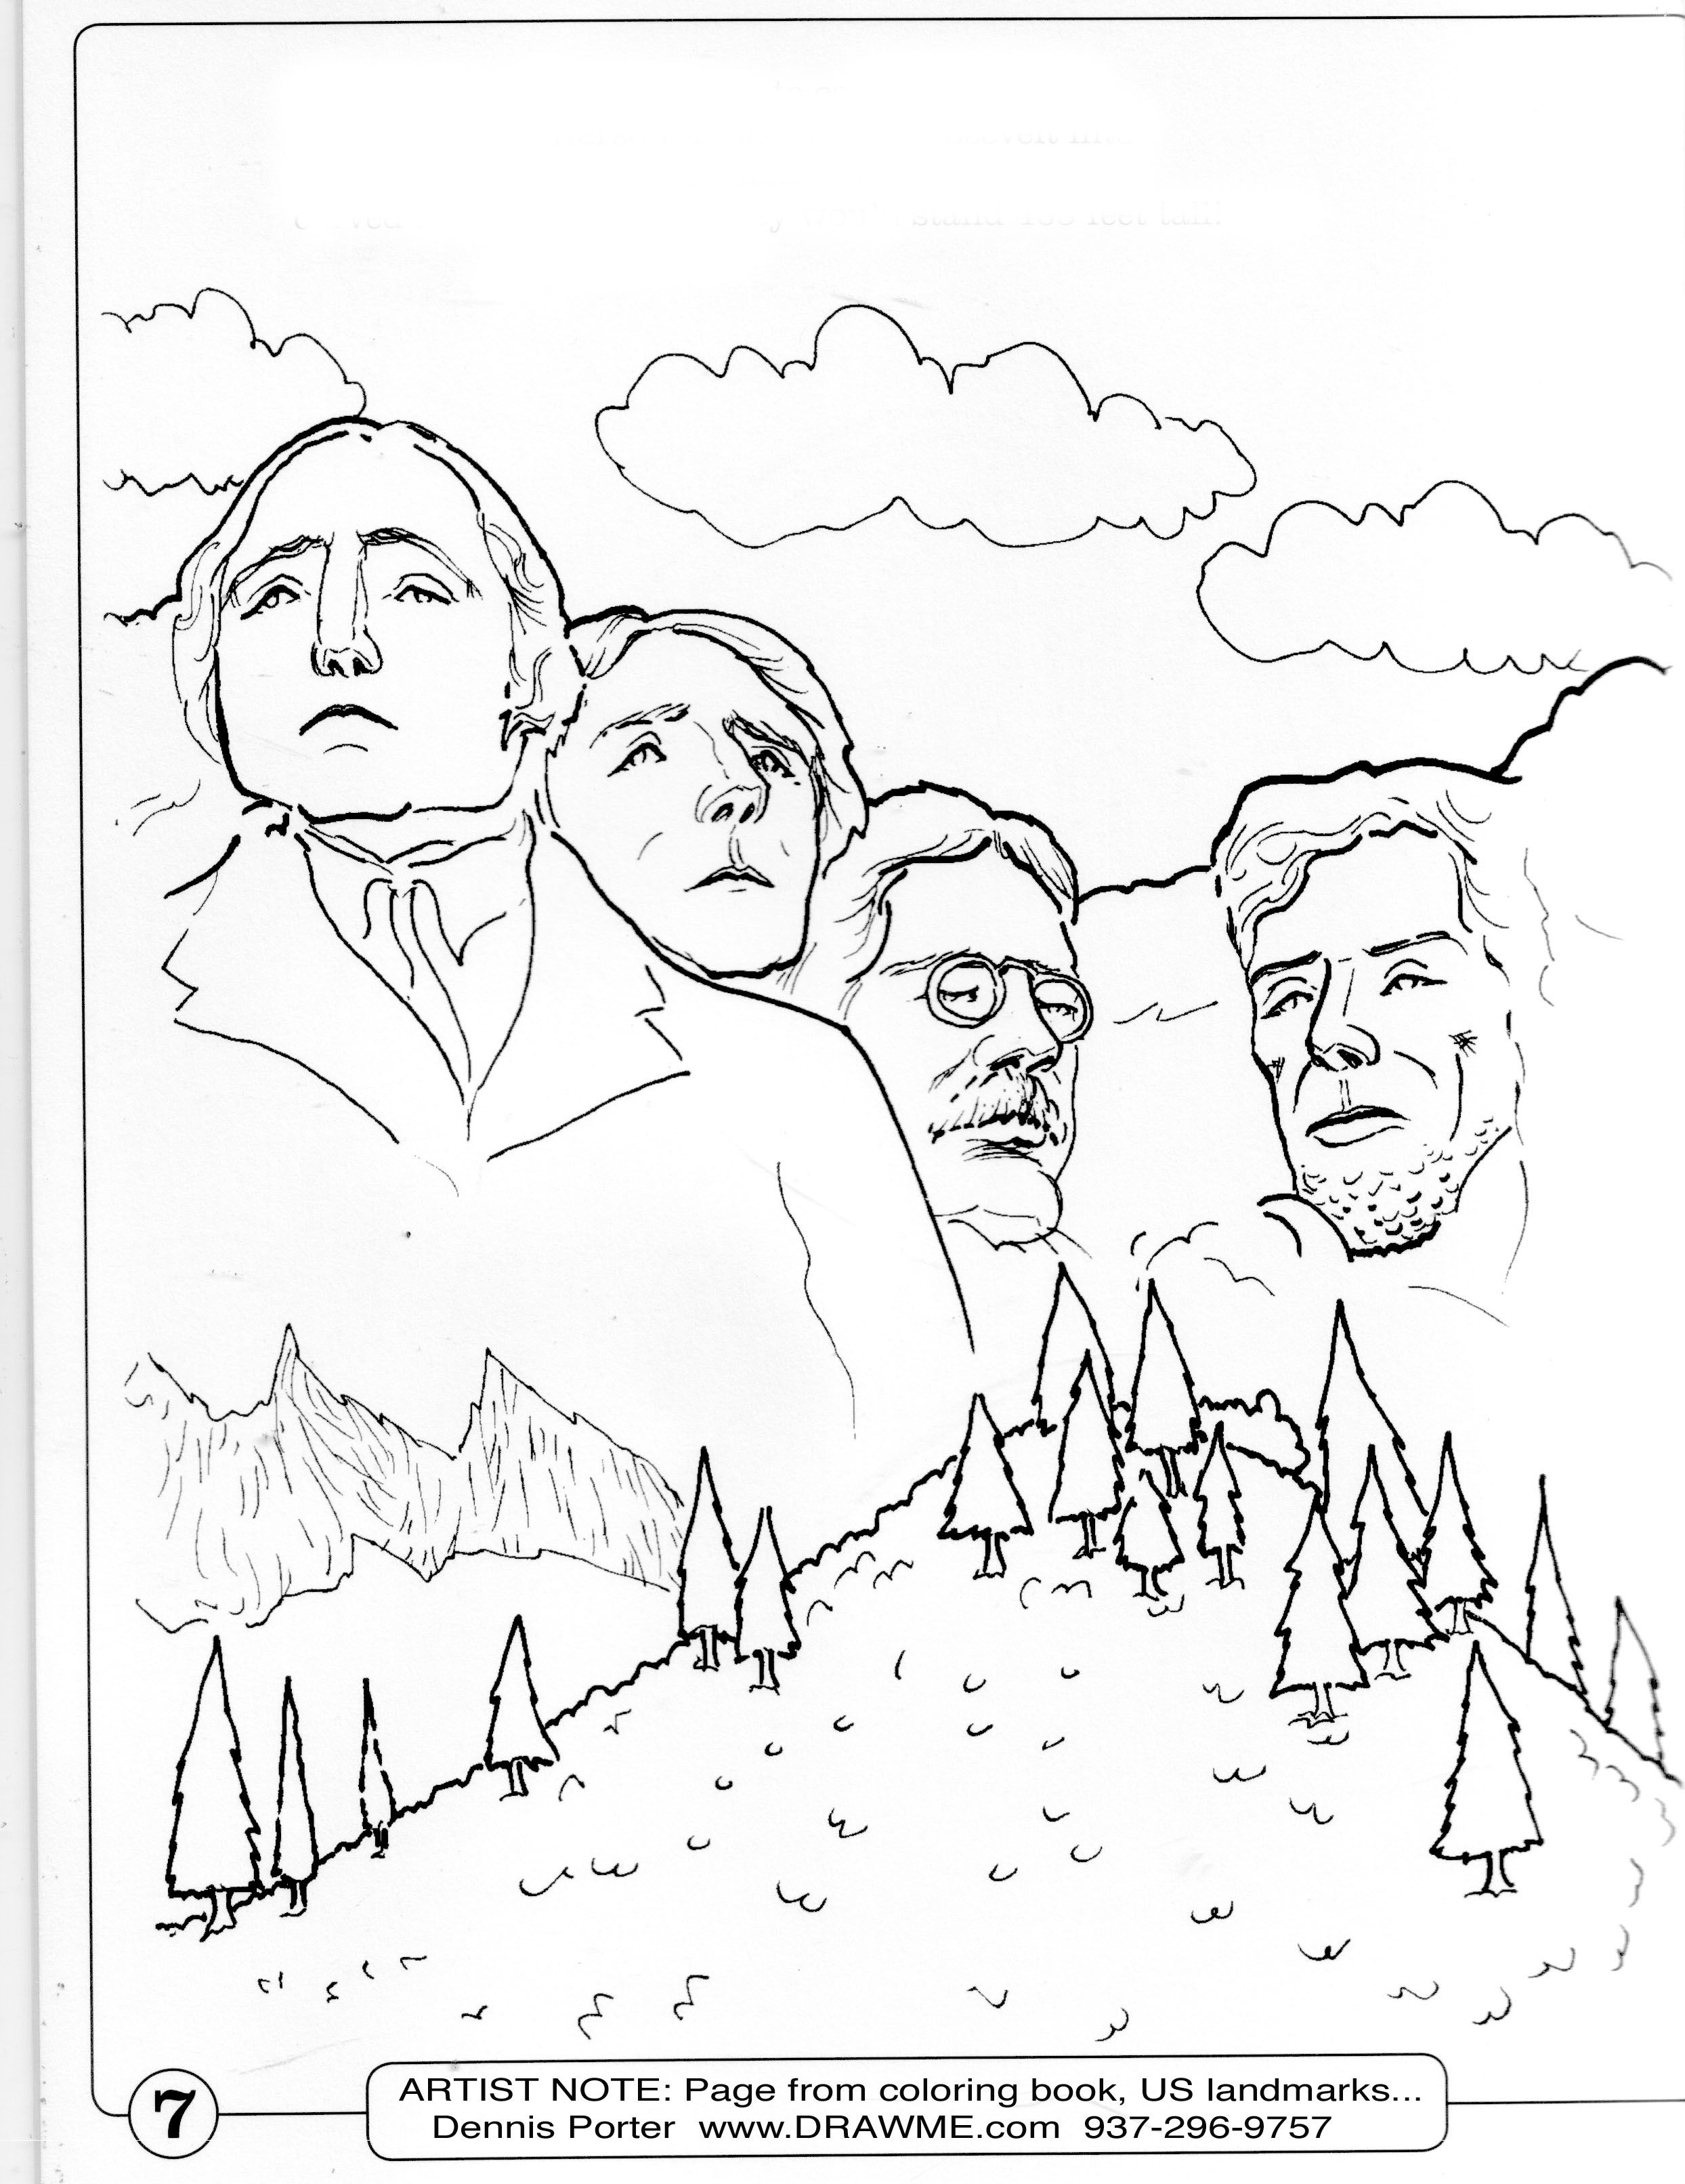 mount-rushmore-for-a-coloring-book-coloring-pages-inspirational